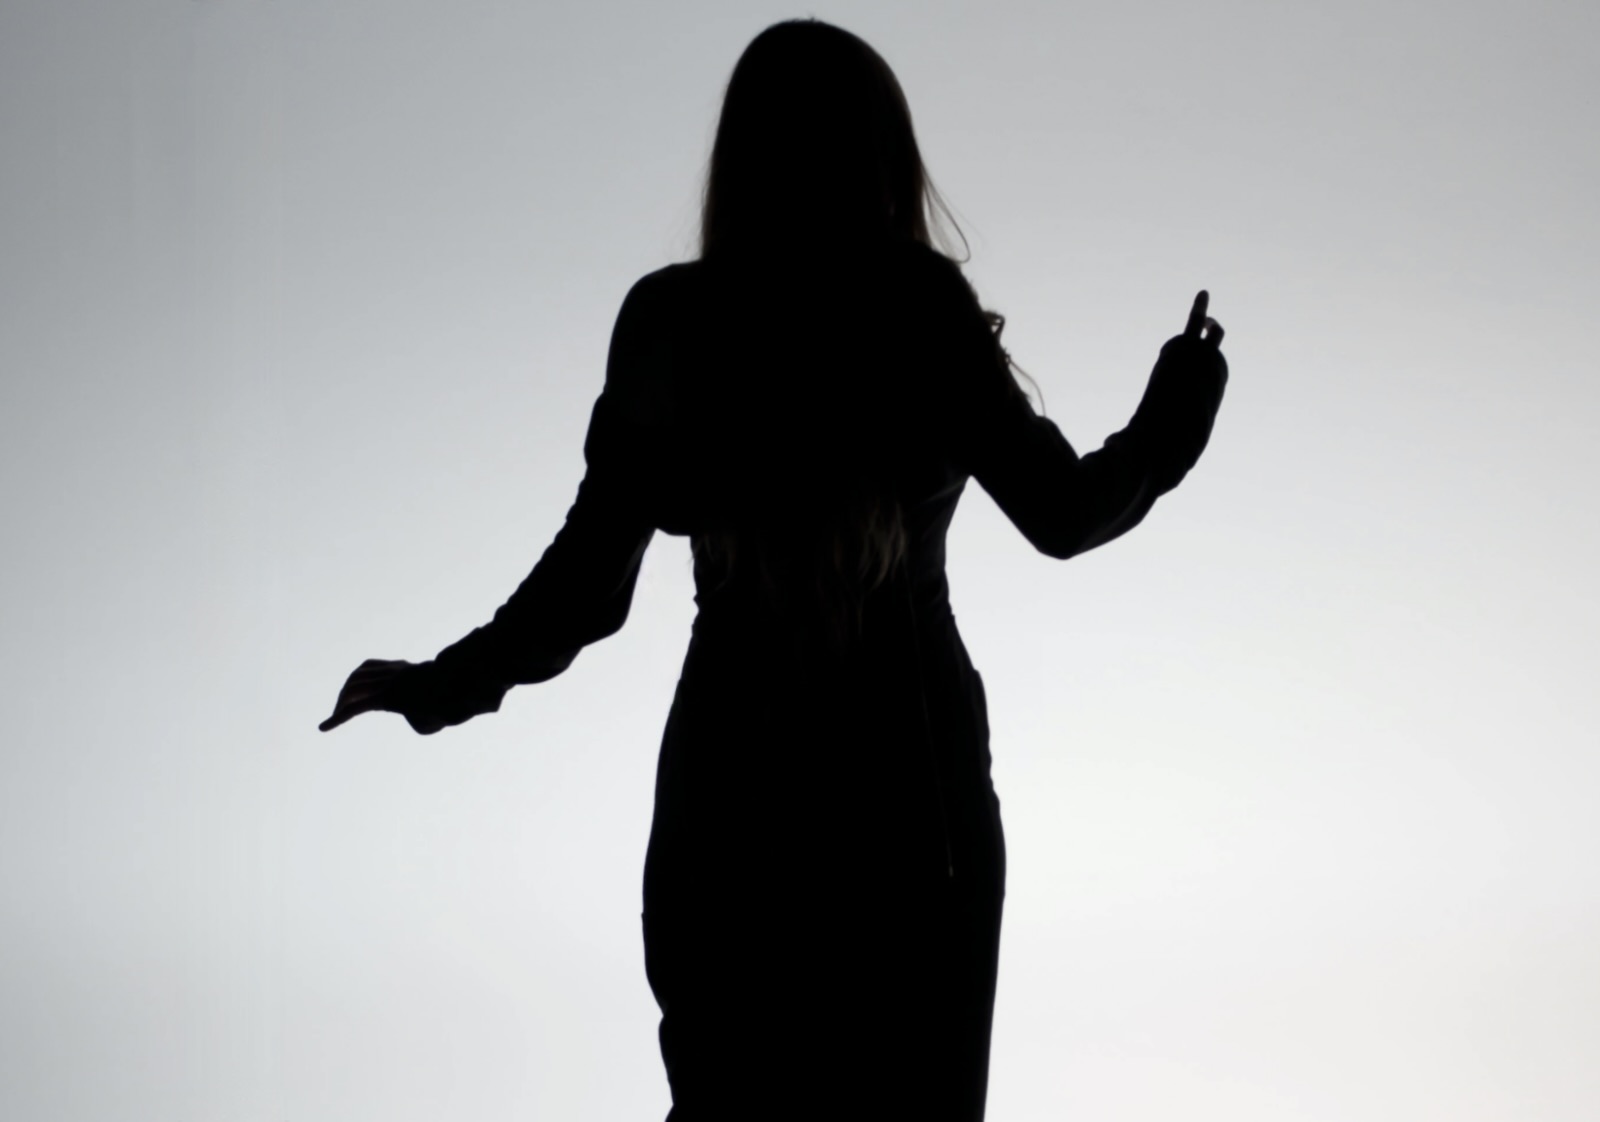 Black and white silhouette of a woman